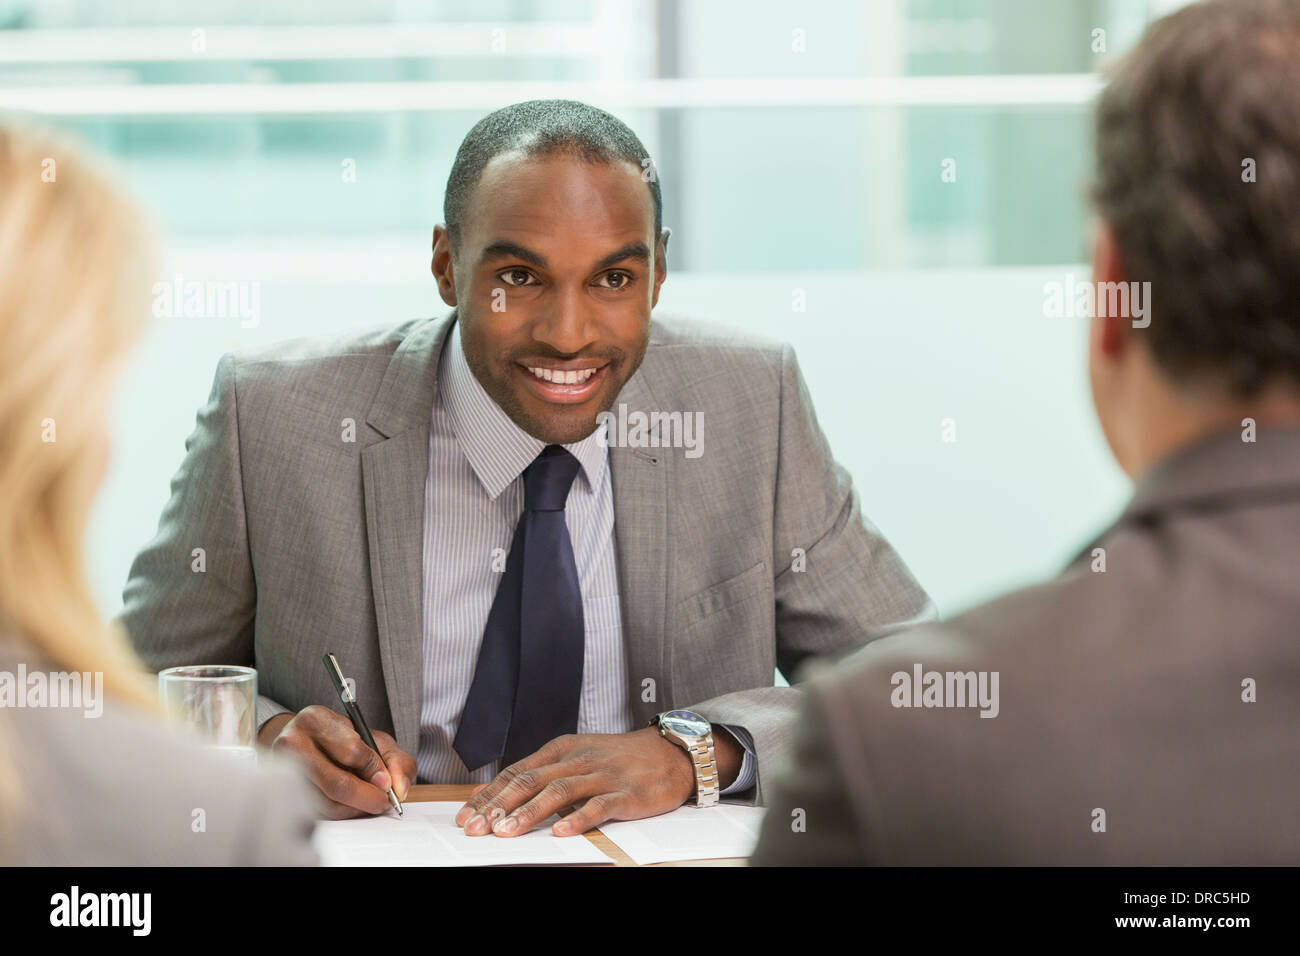 Businessman taking notes in meeting Banque D'Images